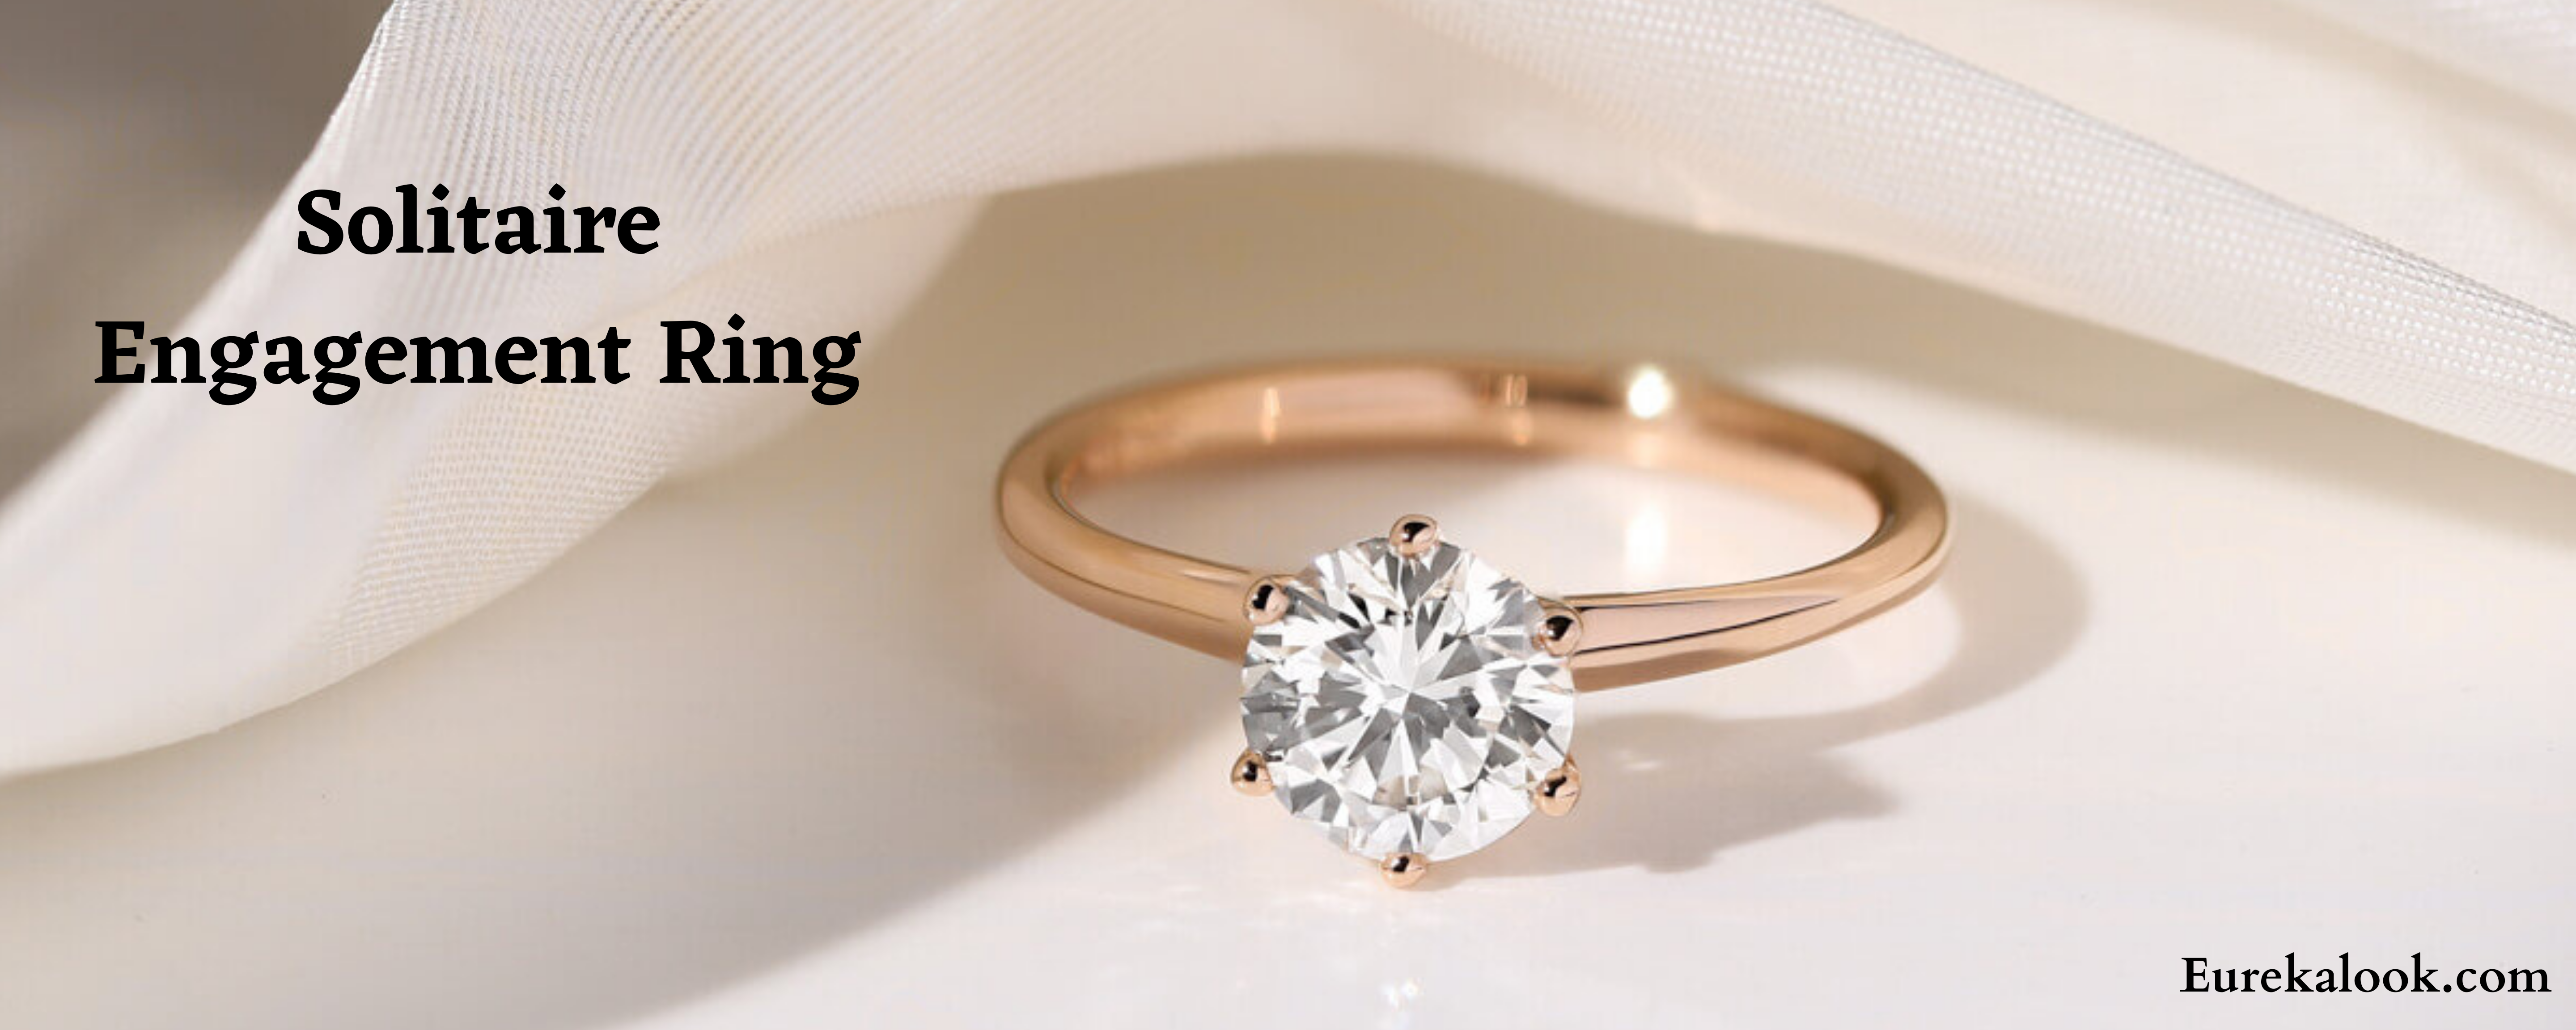 The Great Reason to Choose a Solitaire Engagement Ring